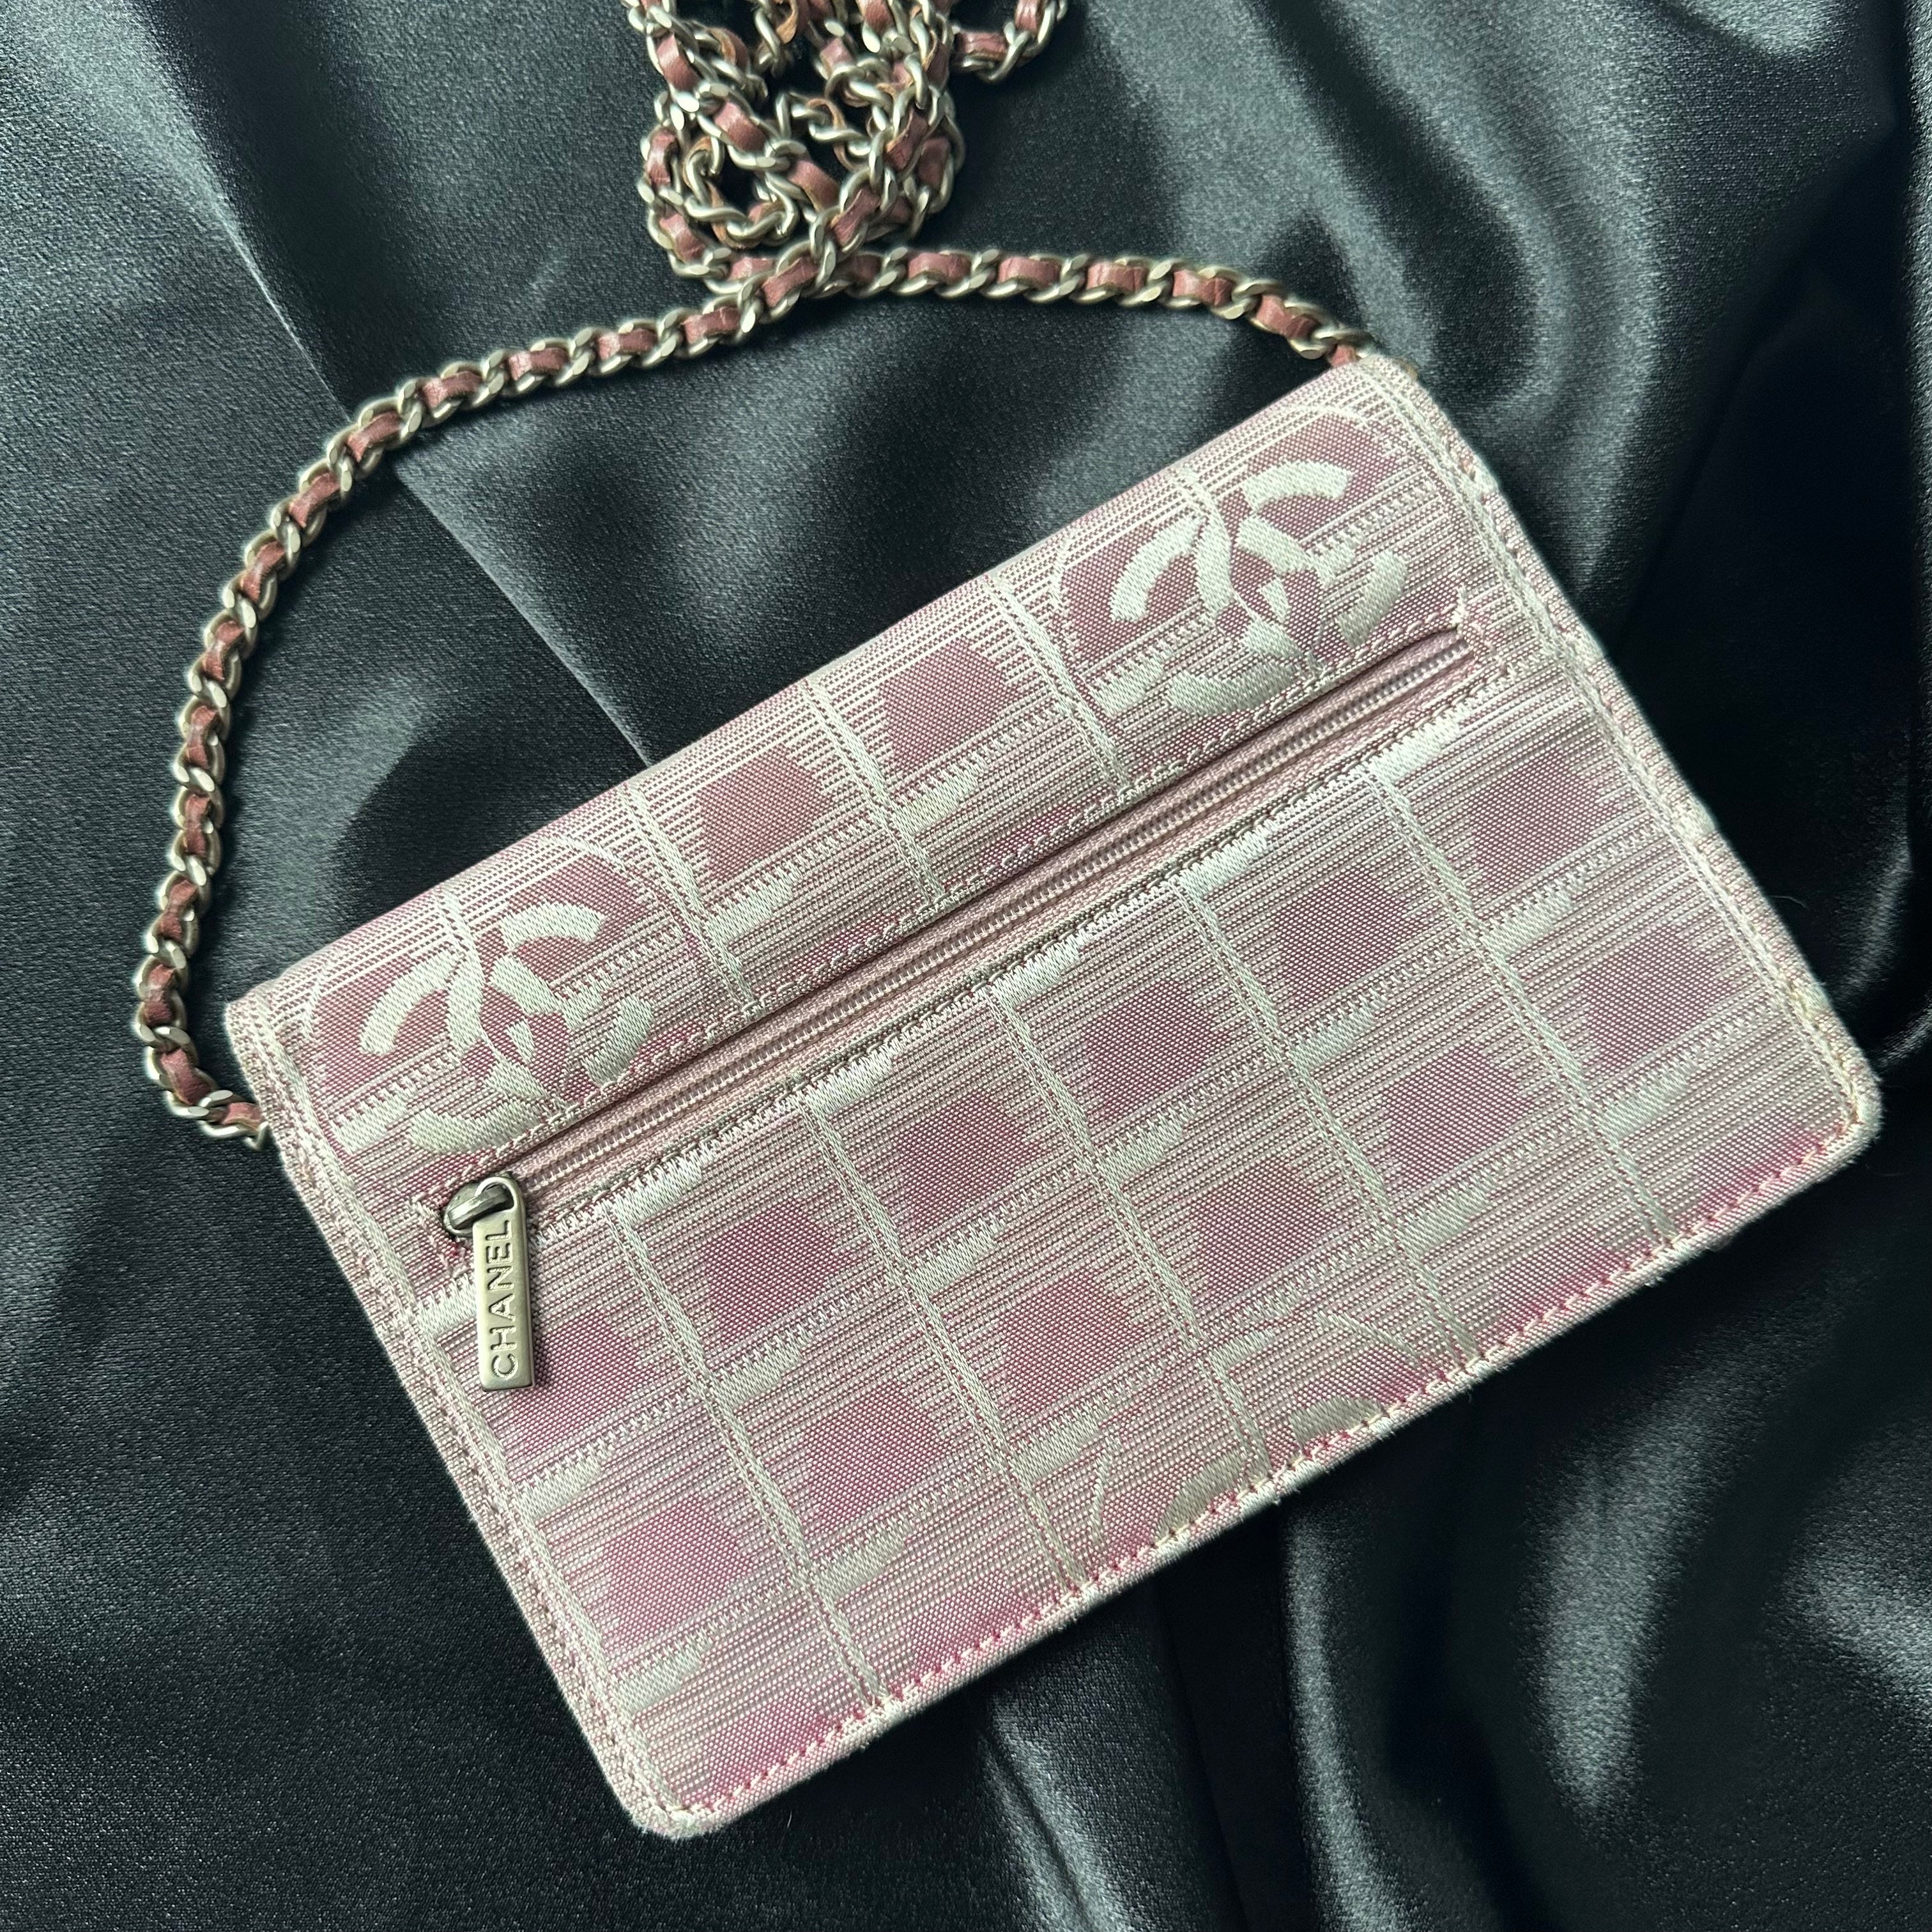 Chanel Gabrielle Woc Double Zip Clutch Wallet on Chain Bag Pink